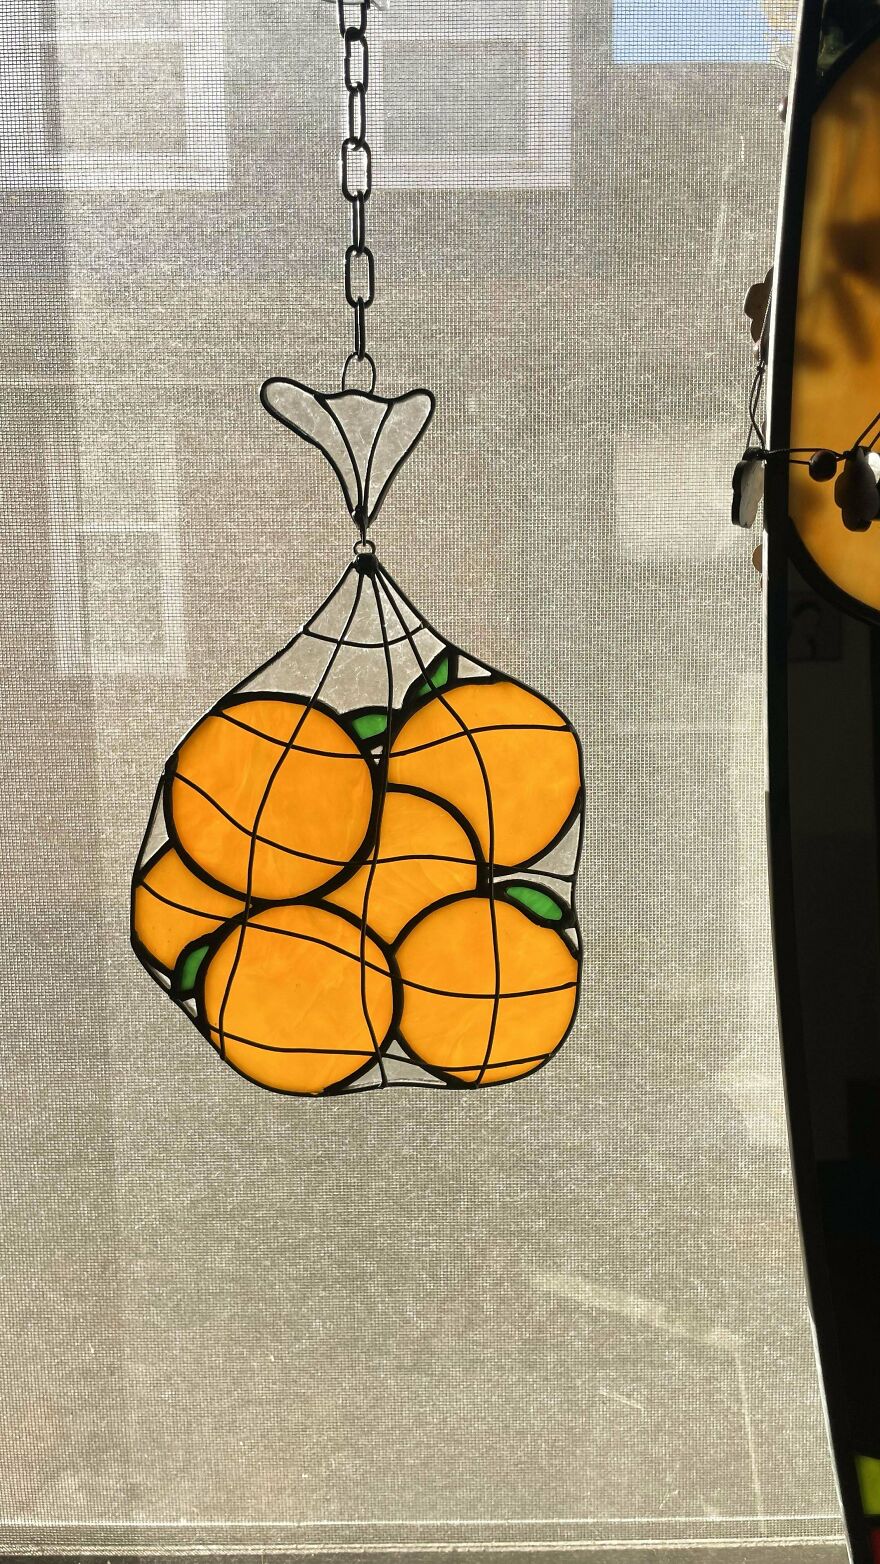 Some Fruity Stained Glass Pieces I’ve Made Recently